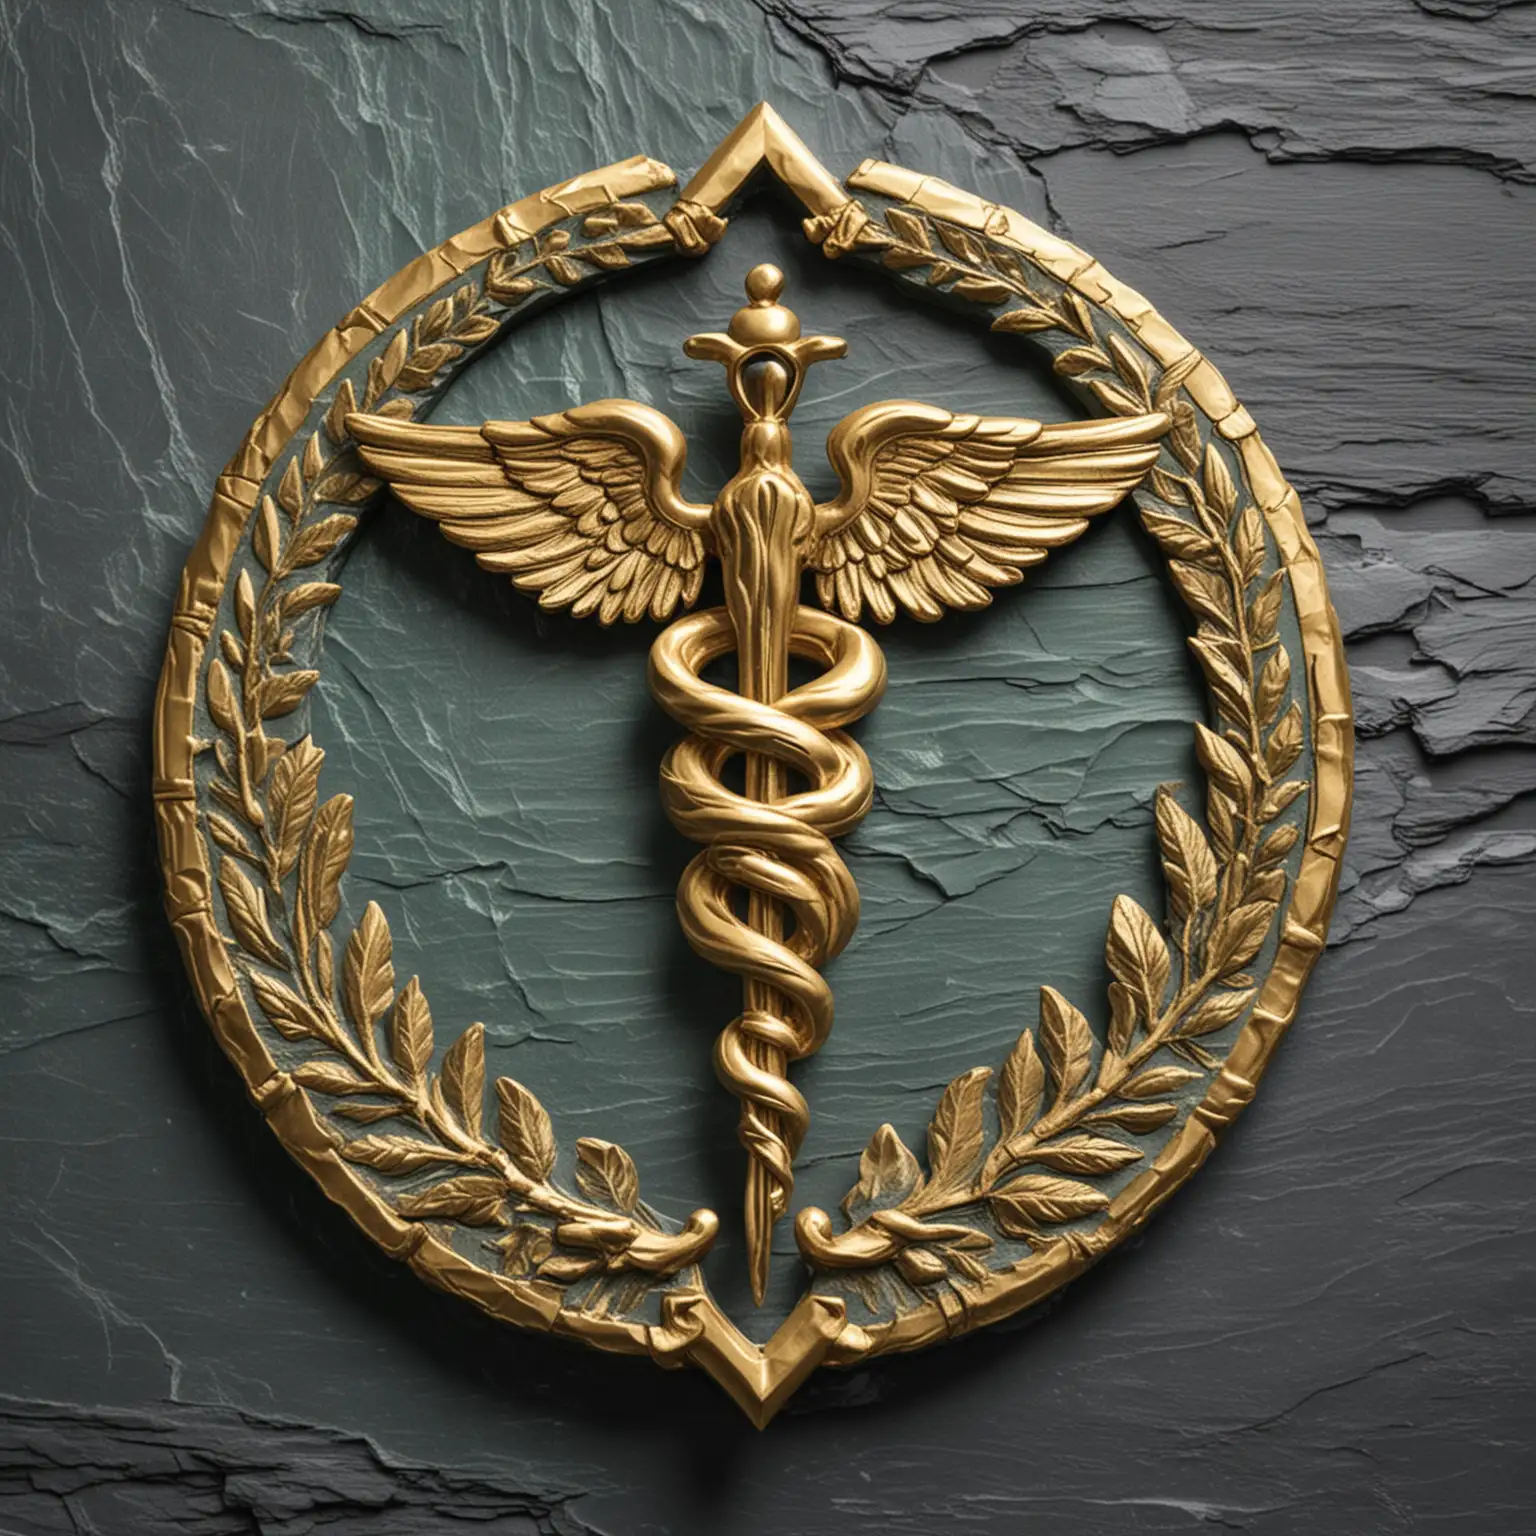 Pictorial Caduceus sign in gold on dark green slate background